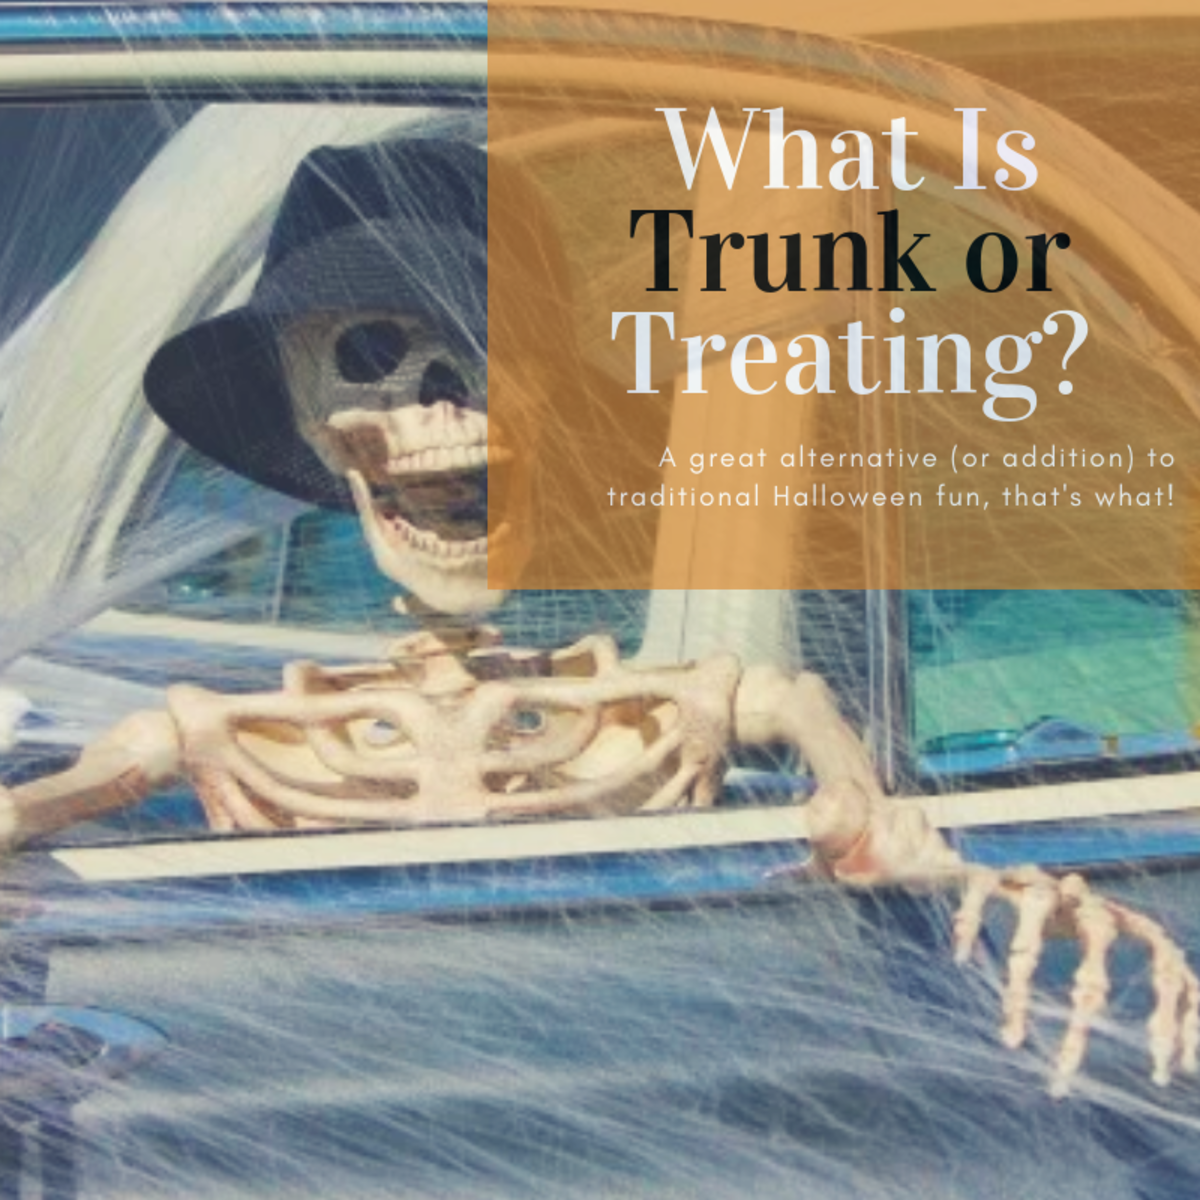 What Is Trunk or Treat?